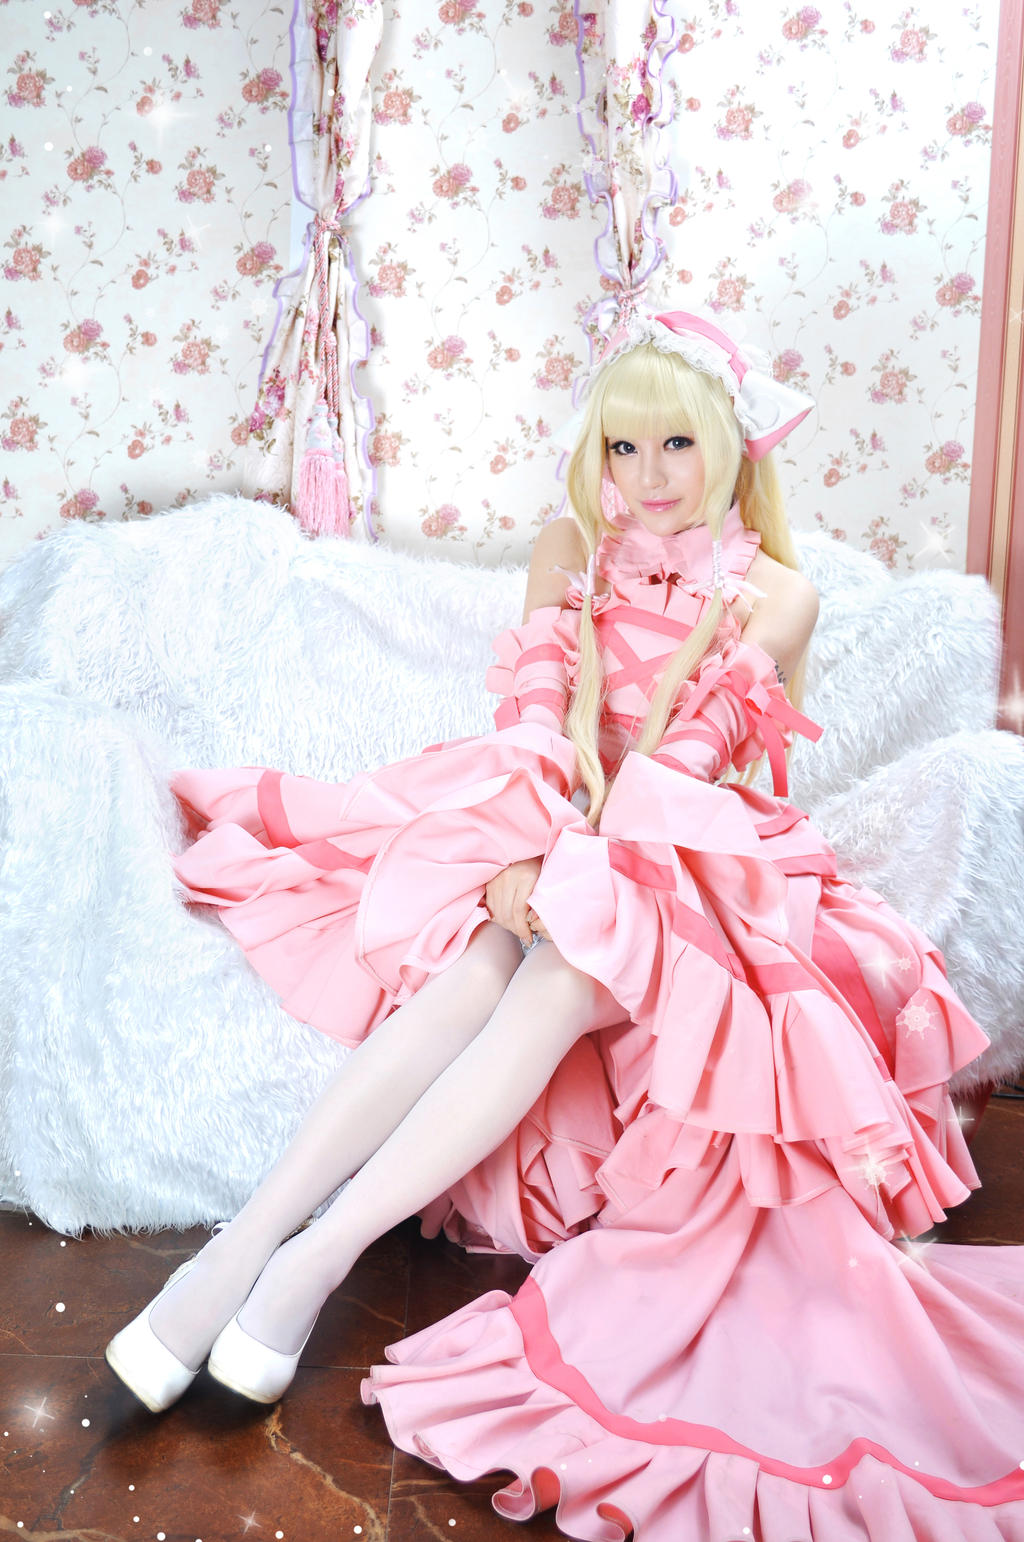 clamp chobits CHII cosplay by Yayababy on DeviantArt